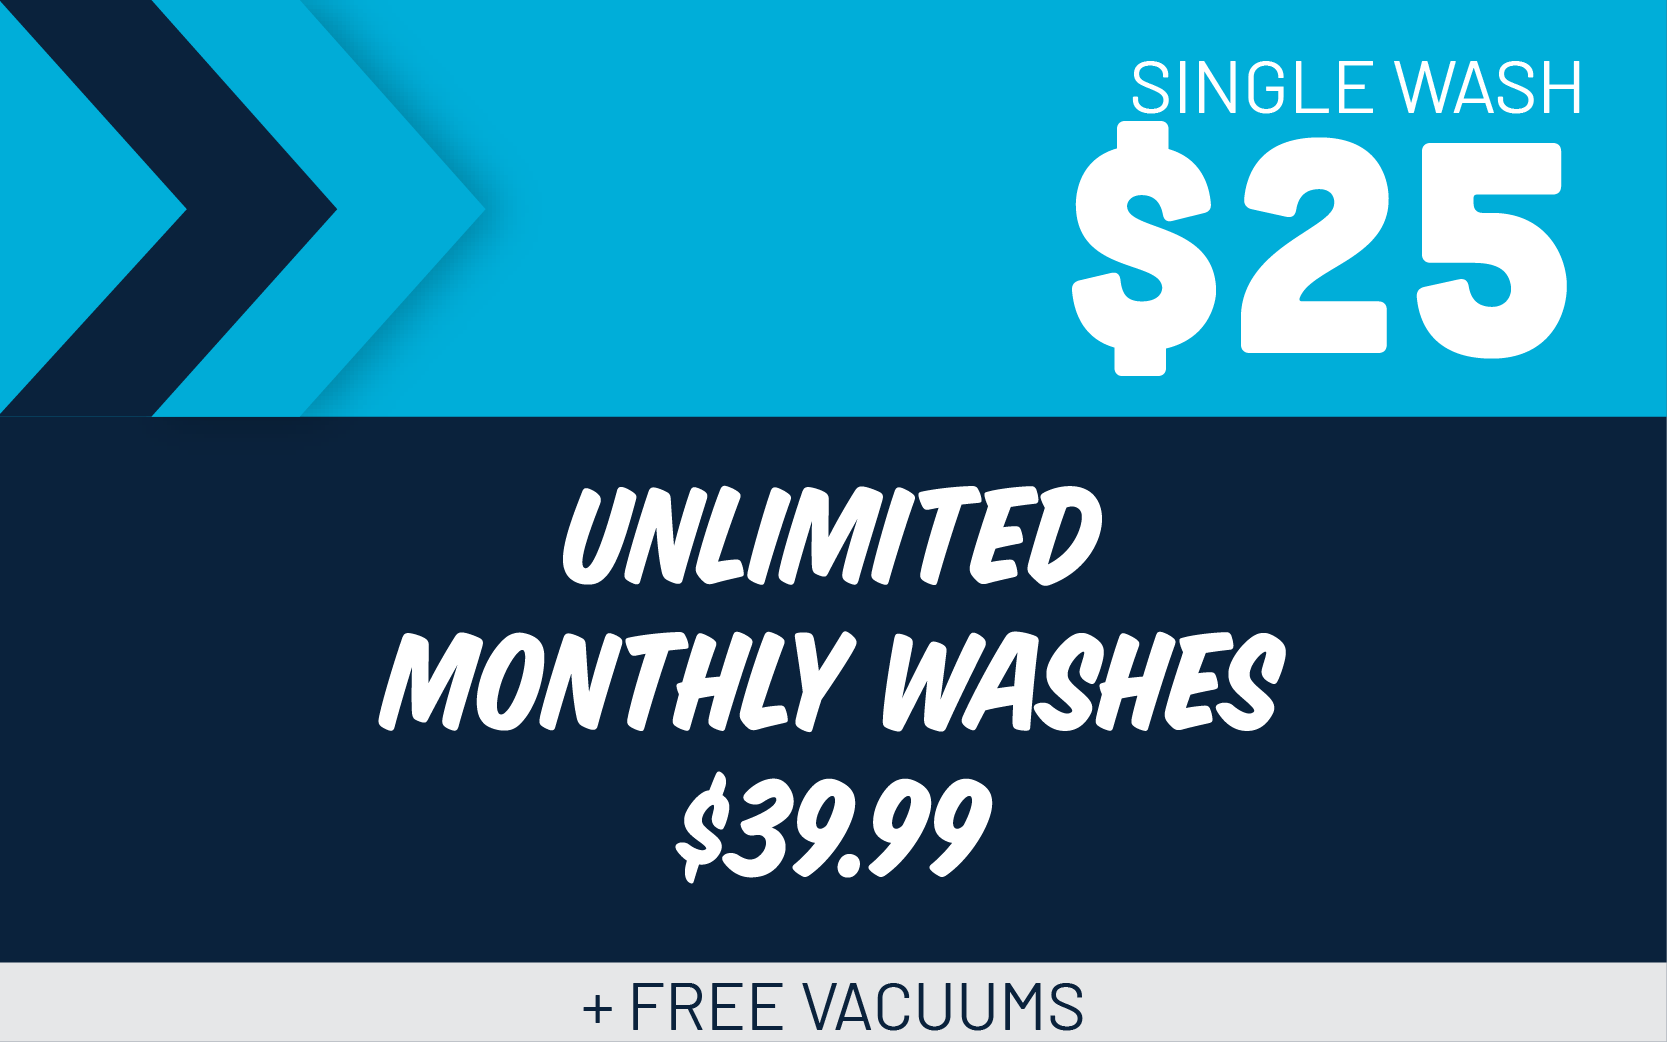 Unlimited Monthly Washes - $35.99 per month